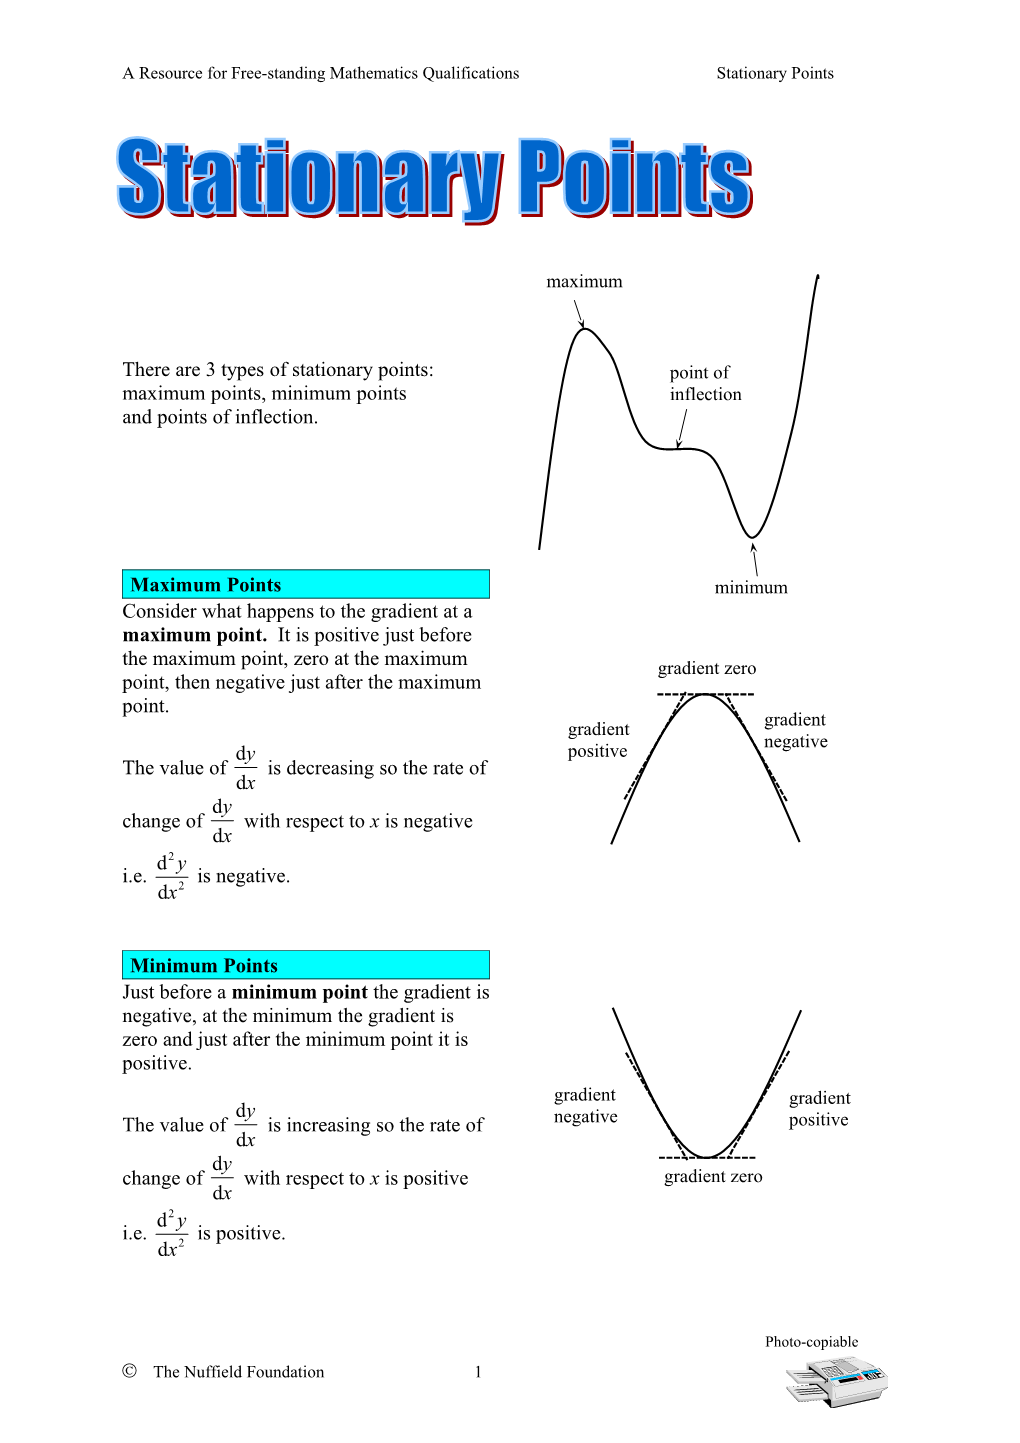 A Resource for Free-Standing Mathematics Qualificationsstationary Points